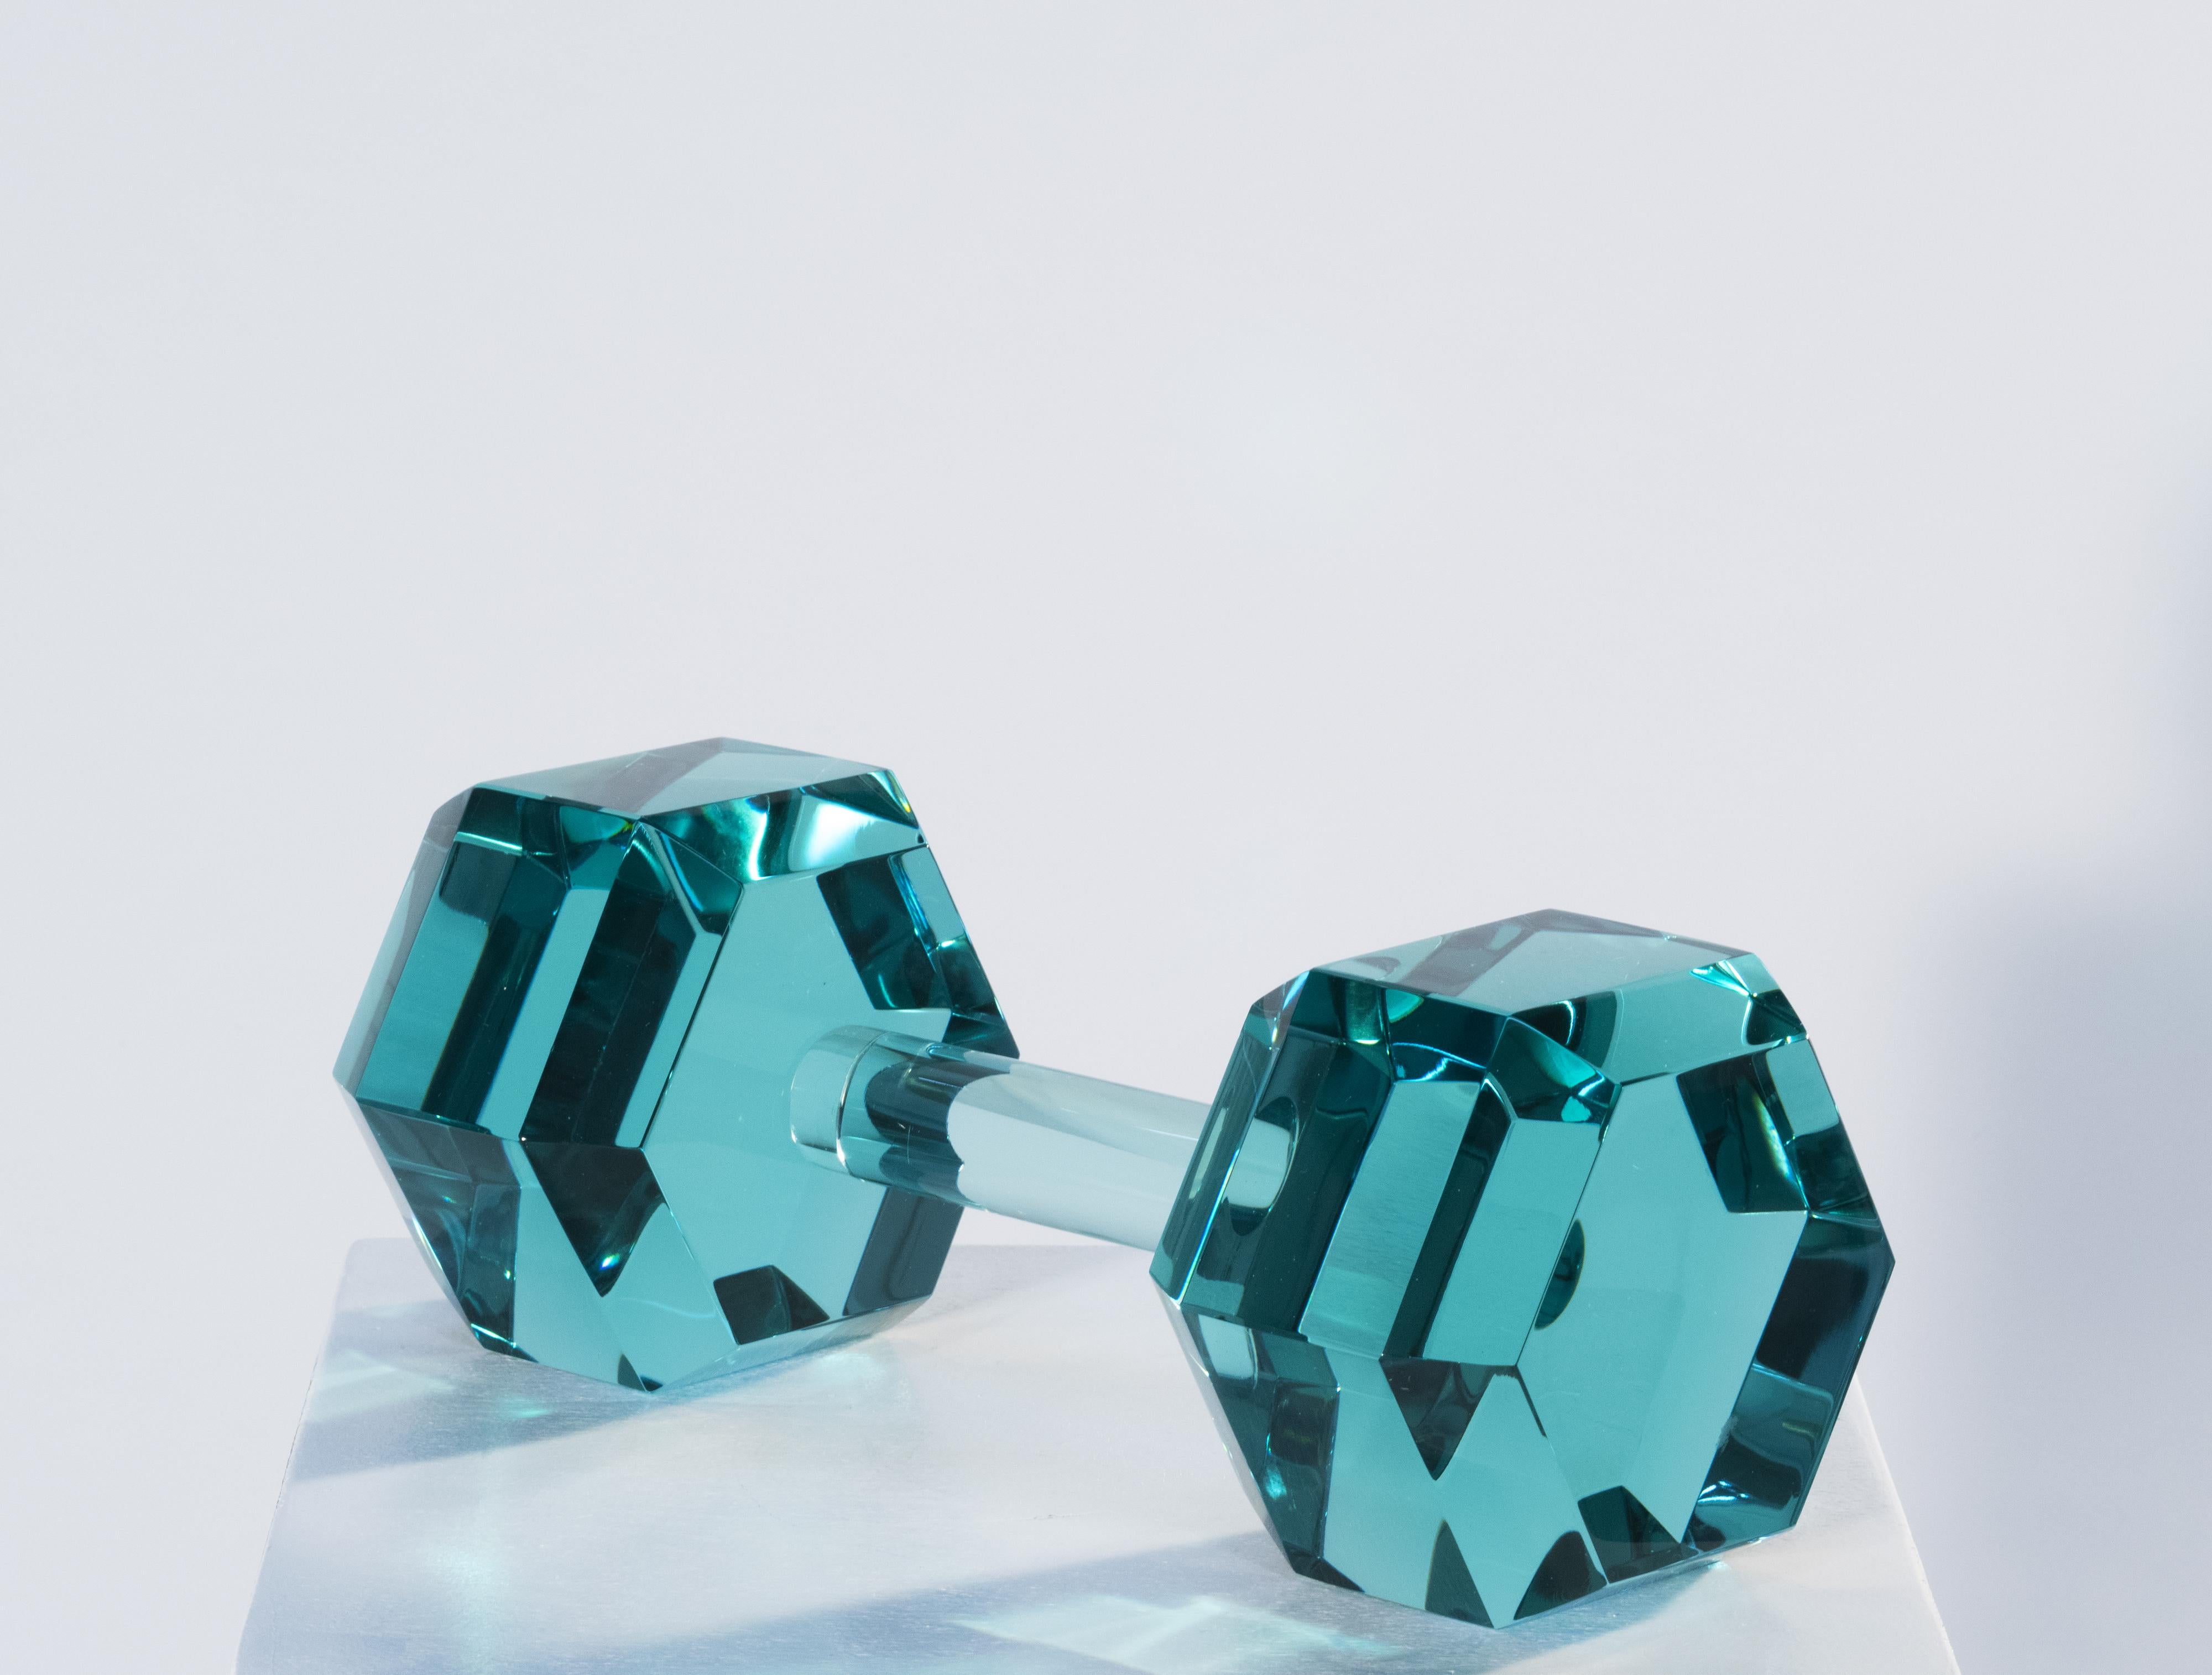 2021 Collection of decorative objects by Ghiro Studio (Milan, Italy).

Each ‘Dumbbell’ sculpture is a unique piece. It is handmade with the utmost care and attention to detail.
It was created sculpting natural blocks of aquamarine crystal. The